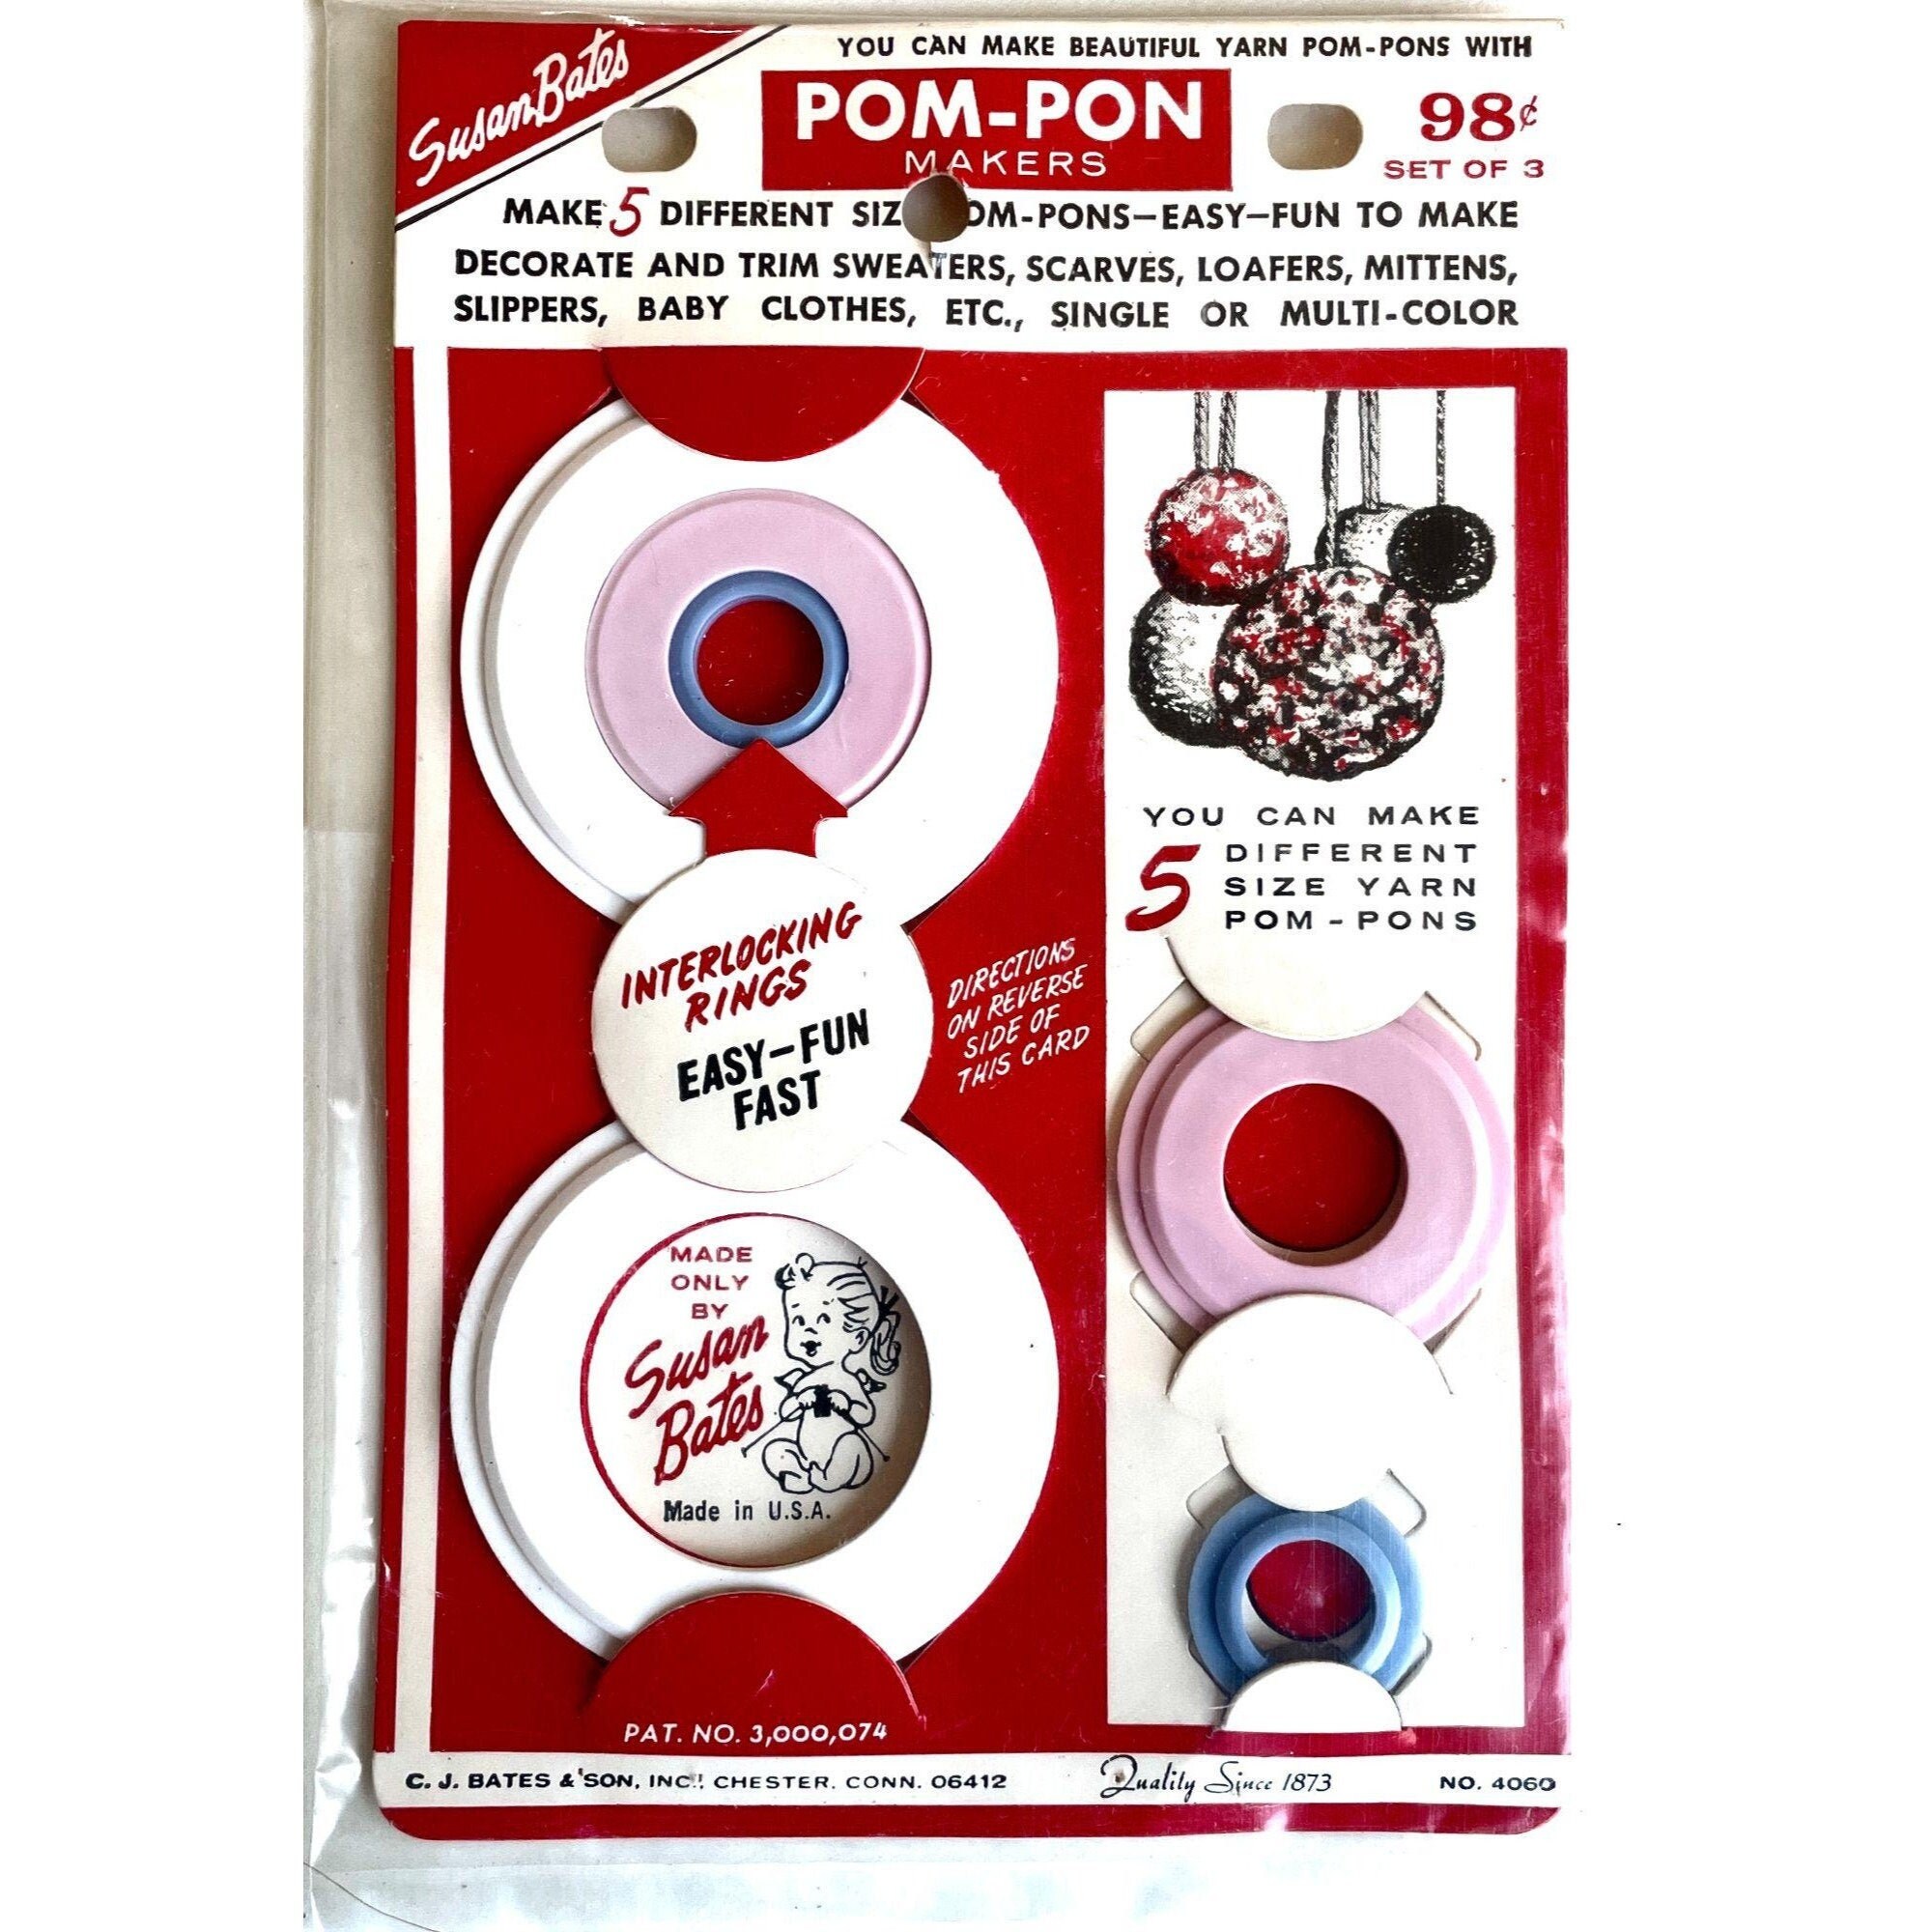 4 pack of POM POM Makers - 4 different sizes in one package! Make perfect  size solid or multi color Pom-Poms! Wind, cut, tie, fluff! #3129